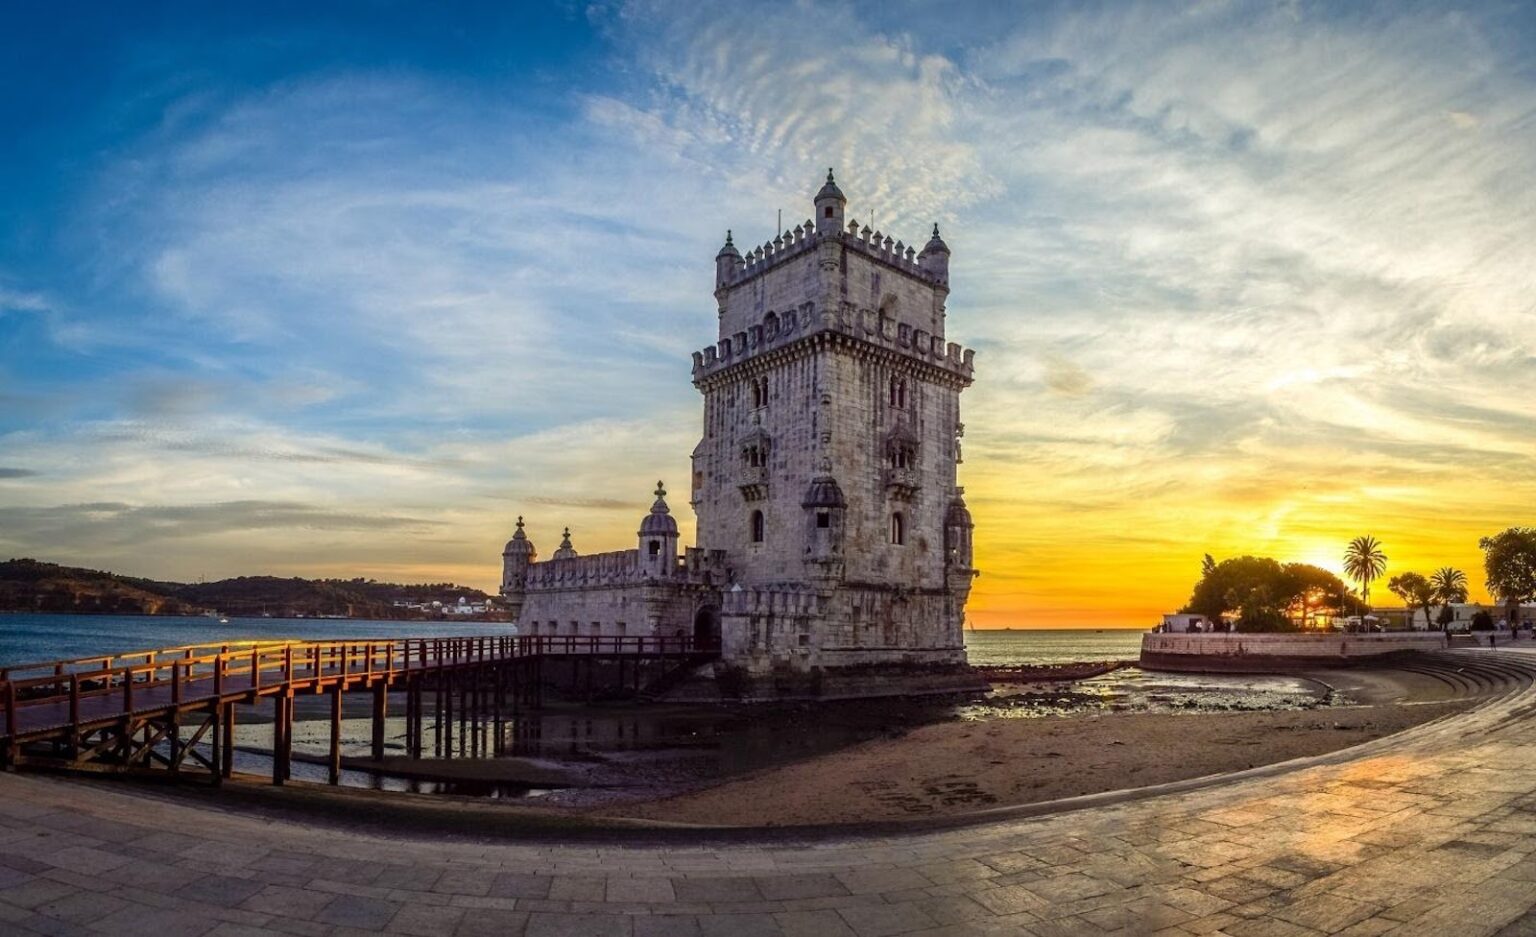 With so many things to see and do, it's surely one of the best tourist destinations in Europe. Find out what you can do on your tour of Lisbon, Portugal.